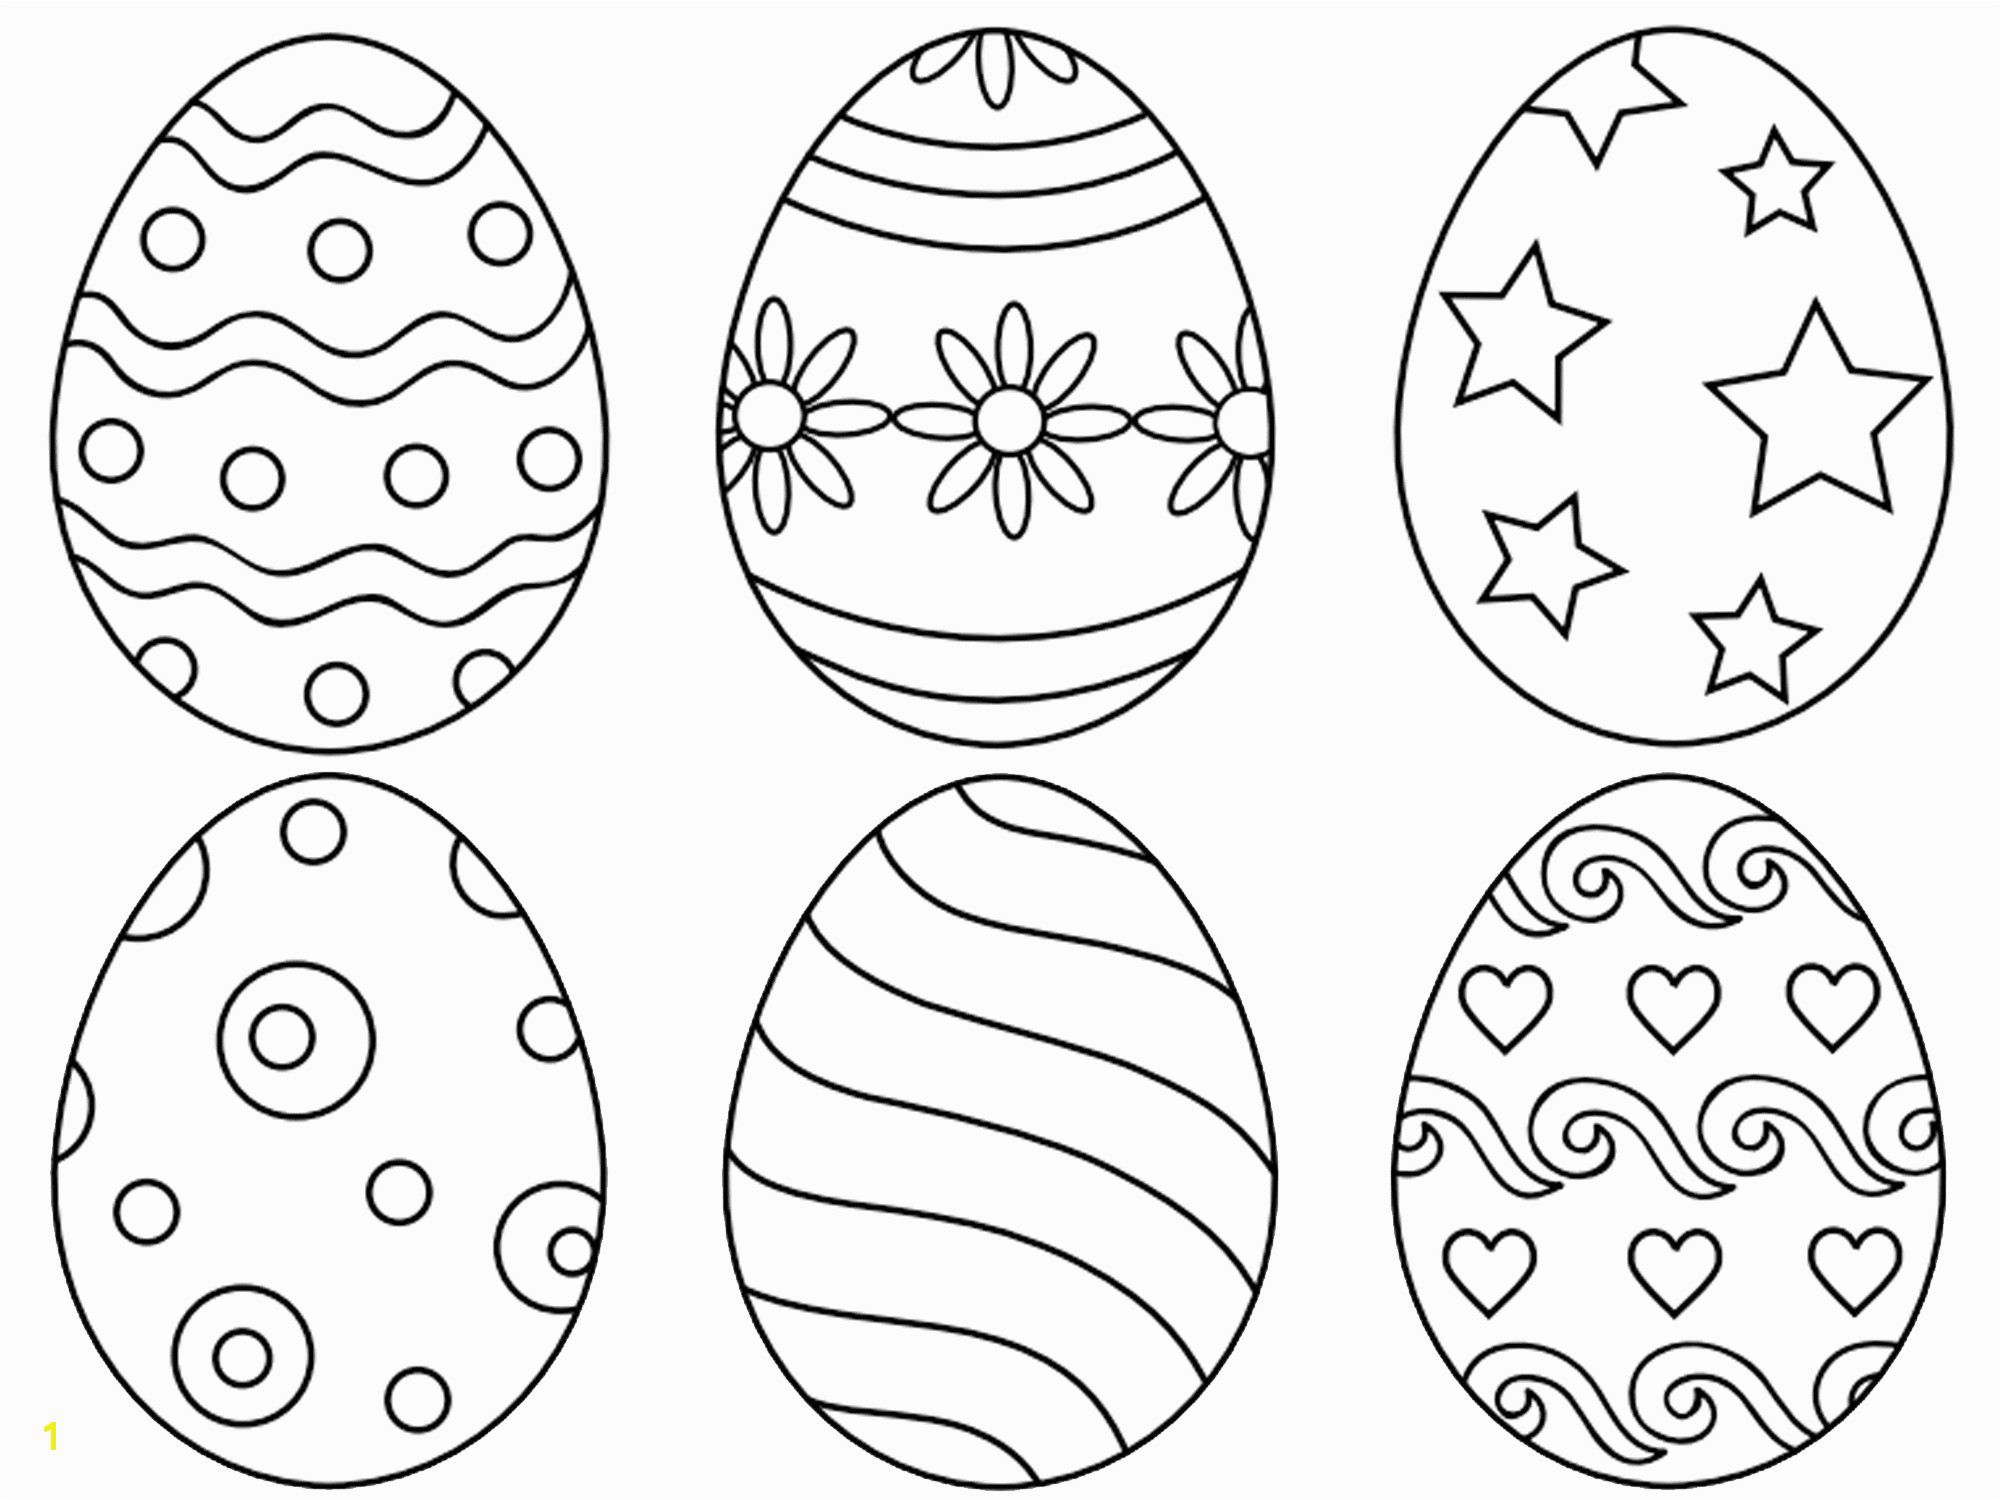 Easter Egg Coloring Pages at First Palette